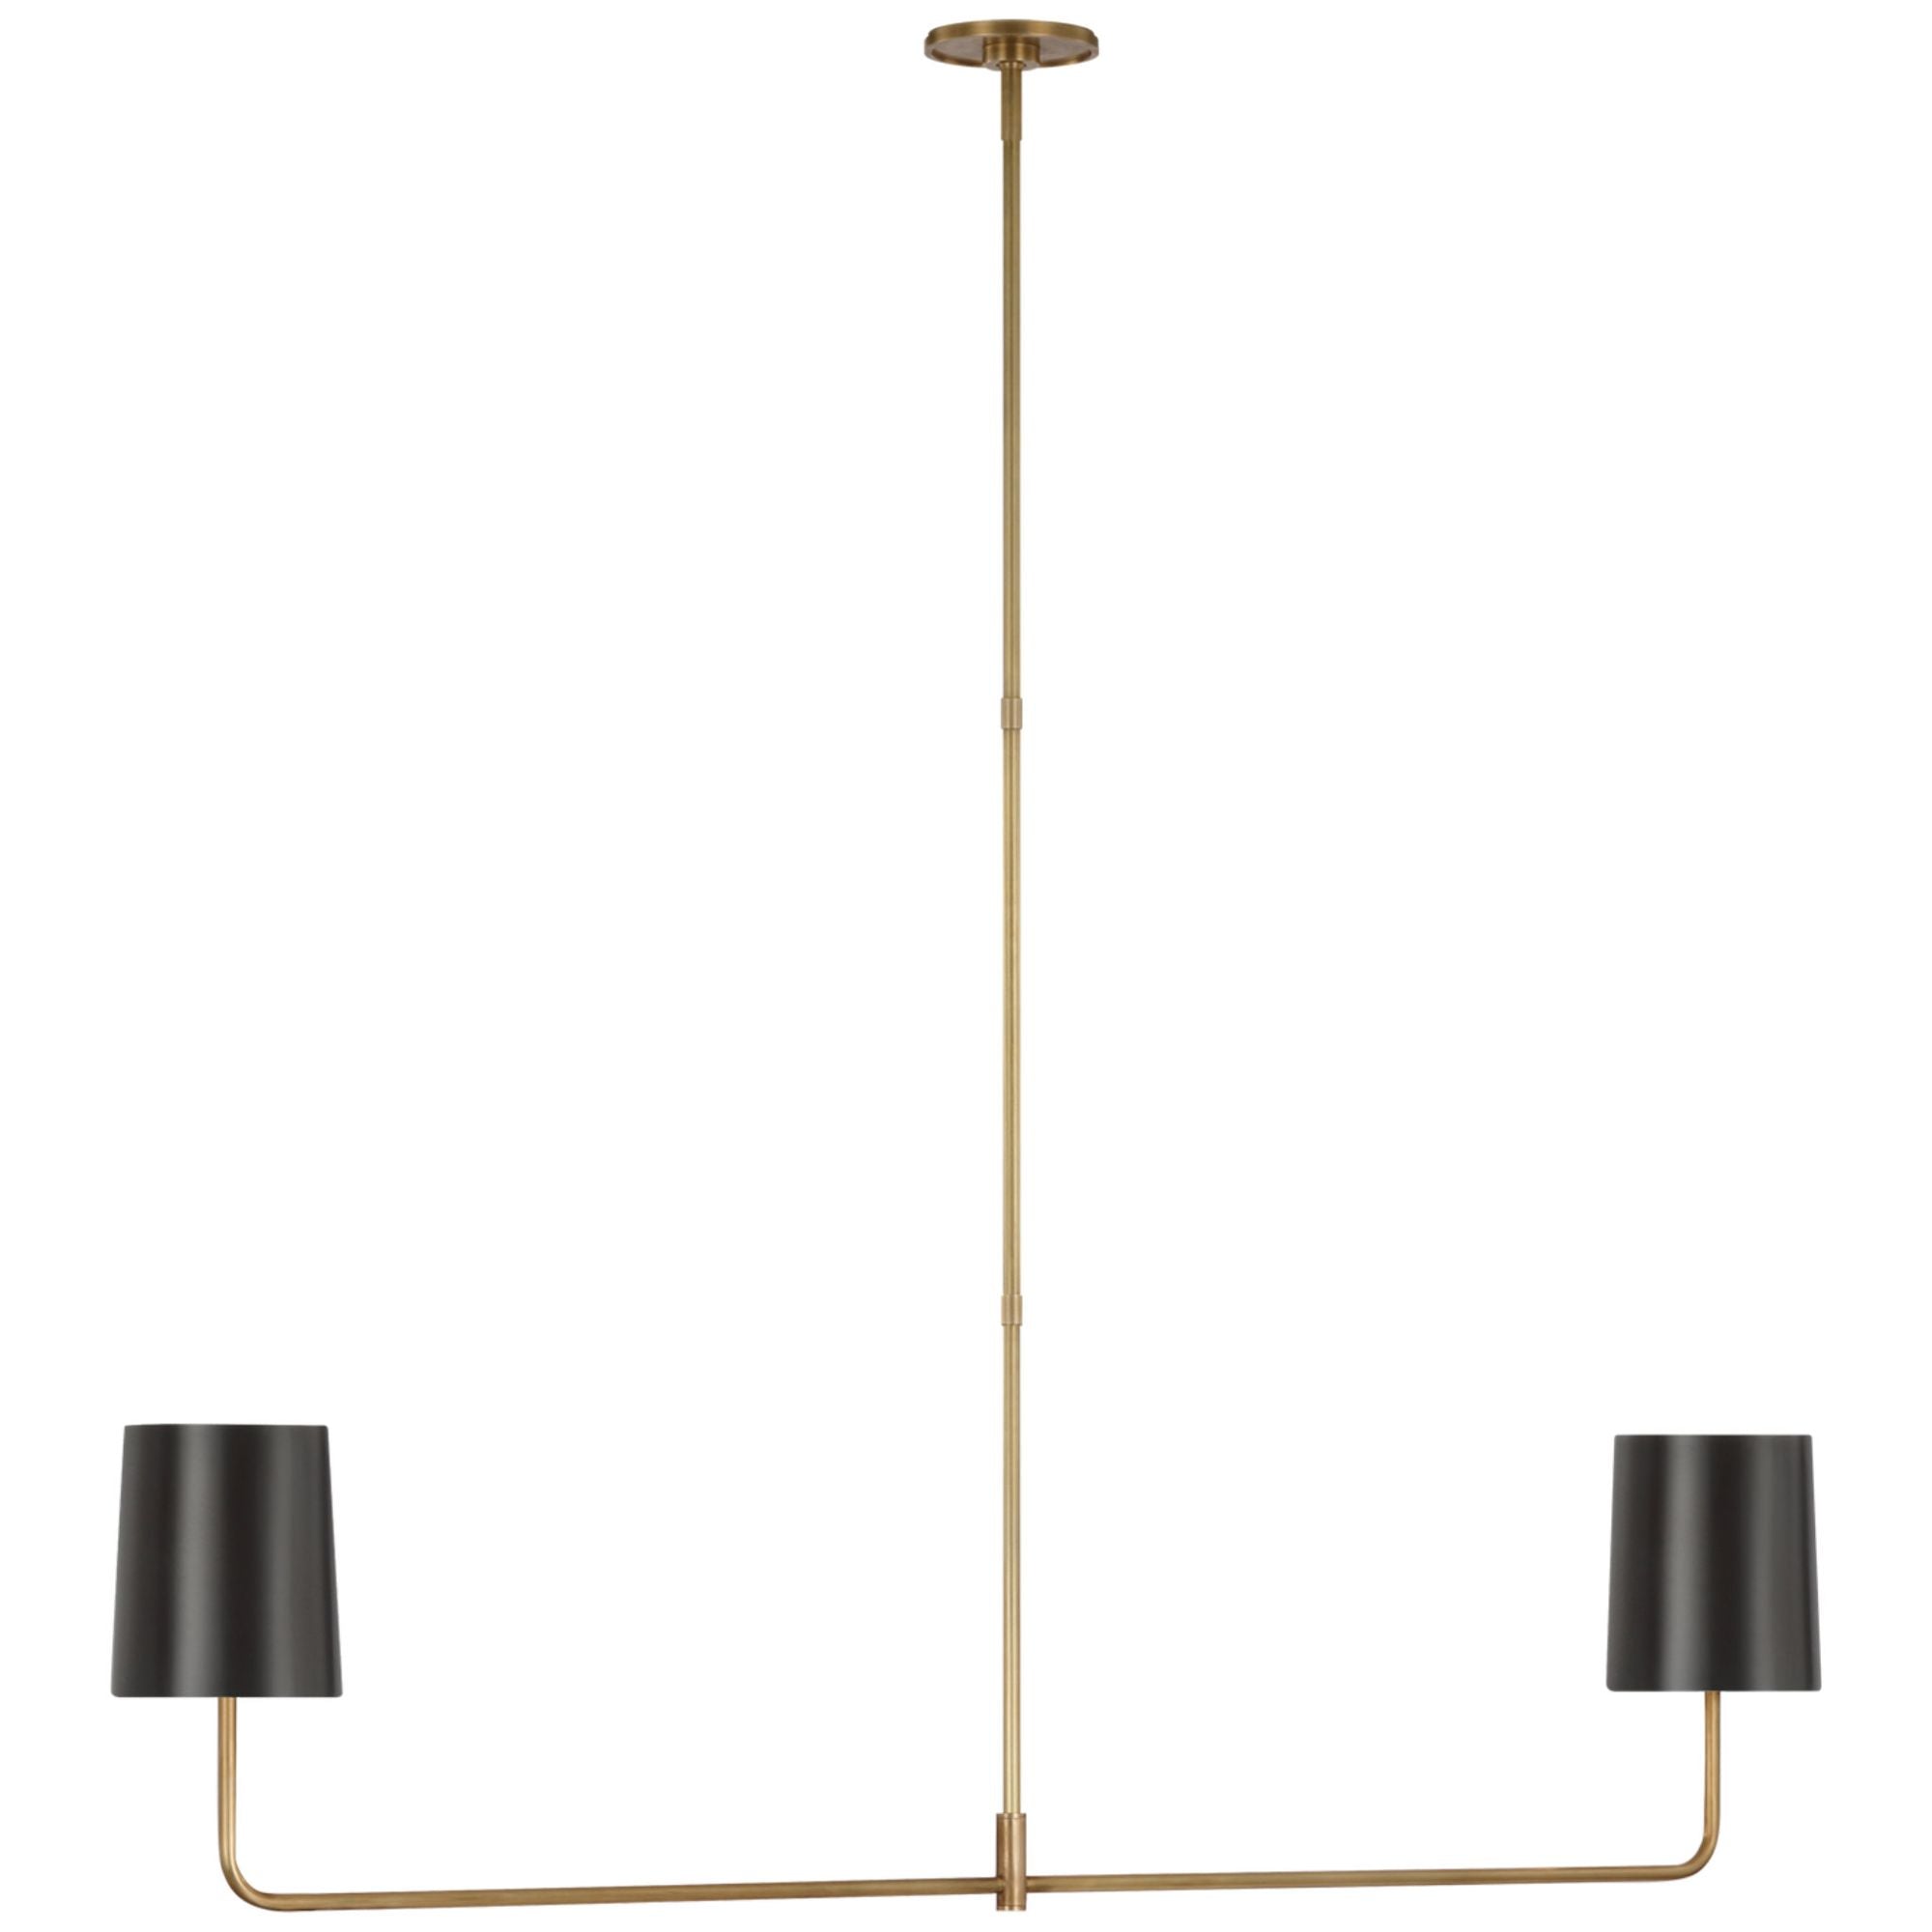 Barbara Barry Go Lightly 54" Two Light Linear Chandelier in Soft Brass with Bronze Shades